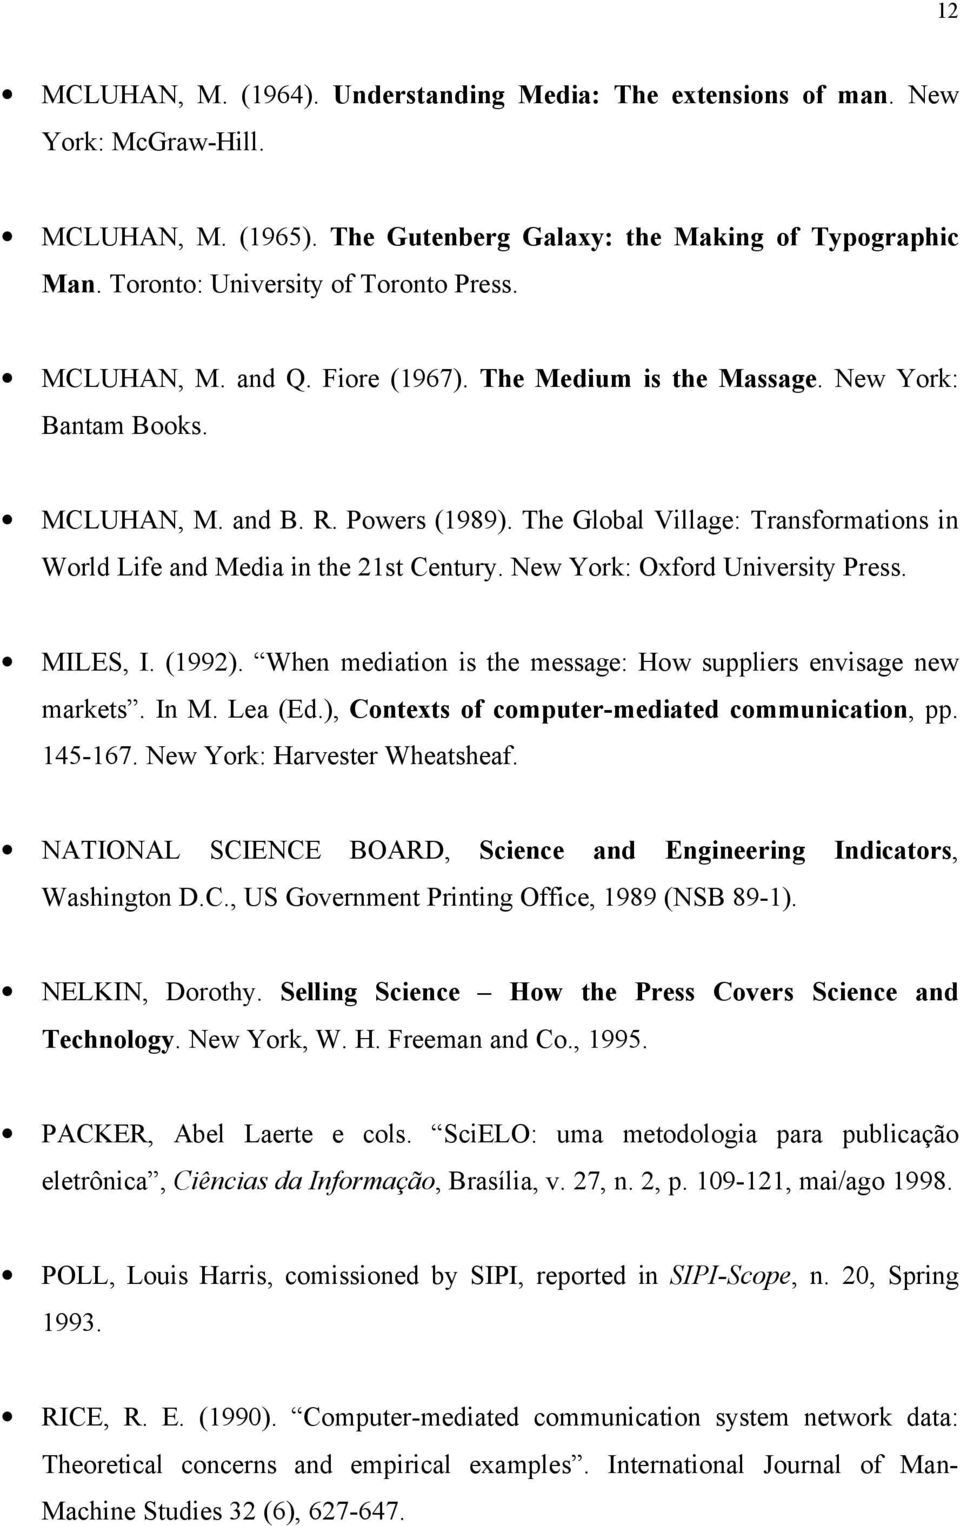 The Global Village: Transformations in World Life and Media in the 21st Century. New York: Oxford University Press. MILES, I. (1992). When mediation is the message: How suppliers envisage new markets.